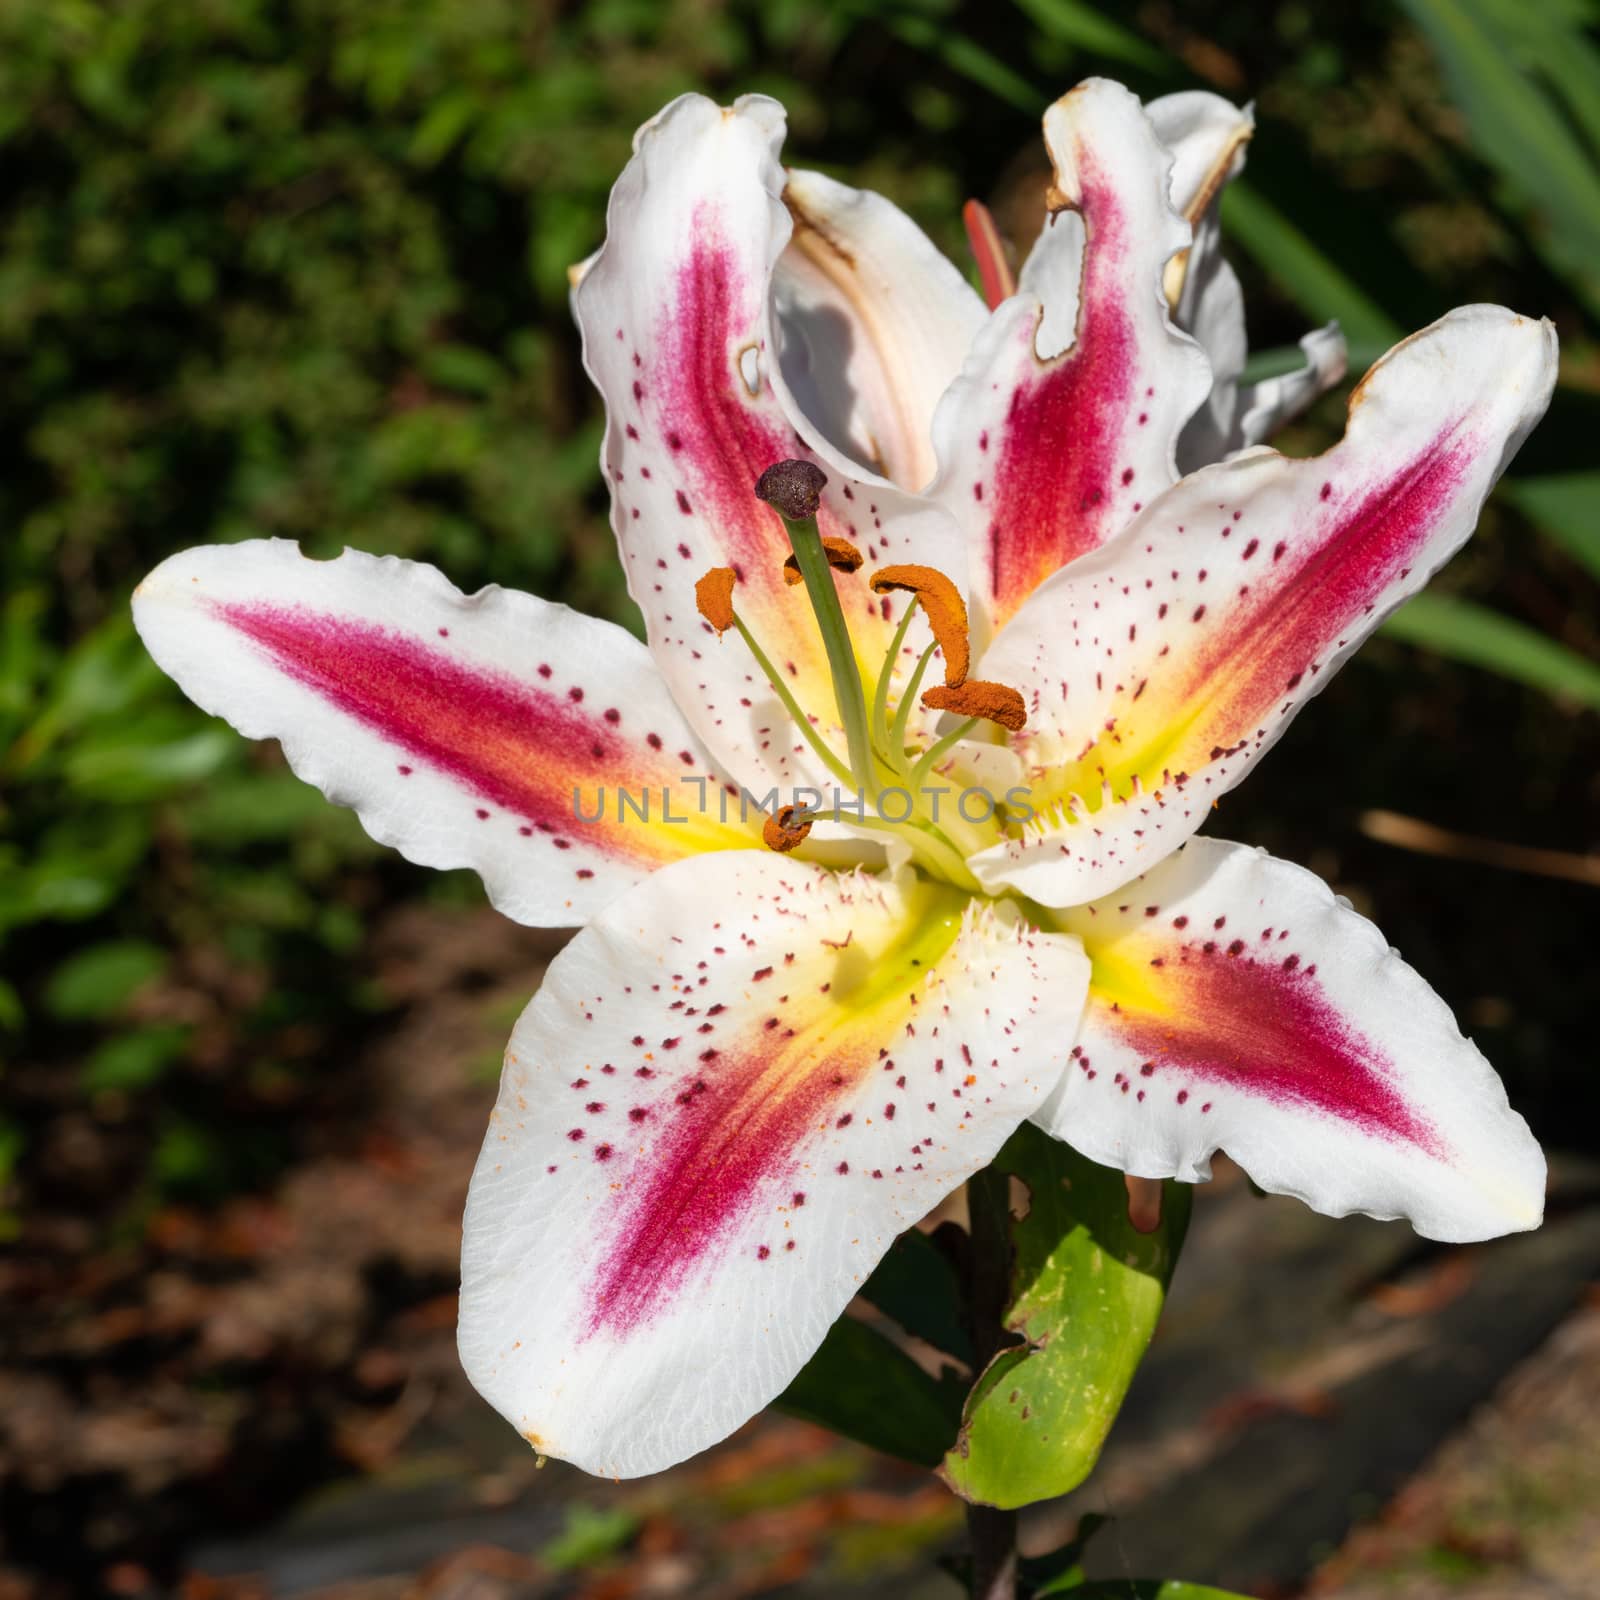 Asian Lily (Lilium asiatic), close up of the flower head